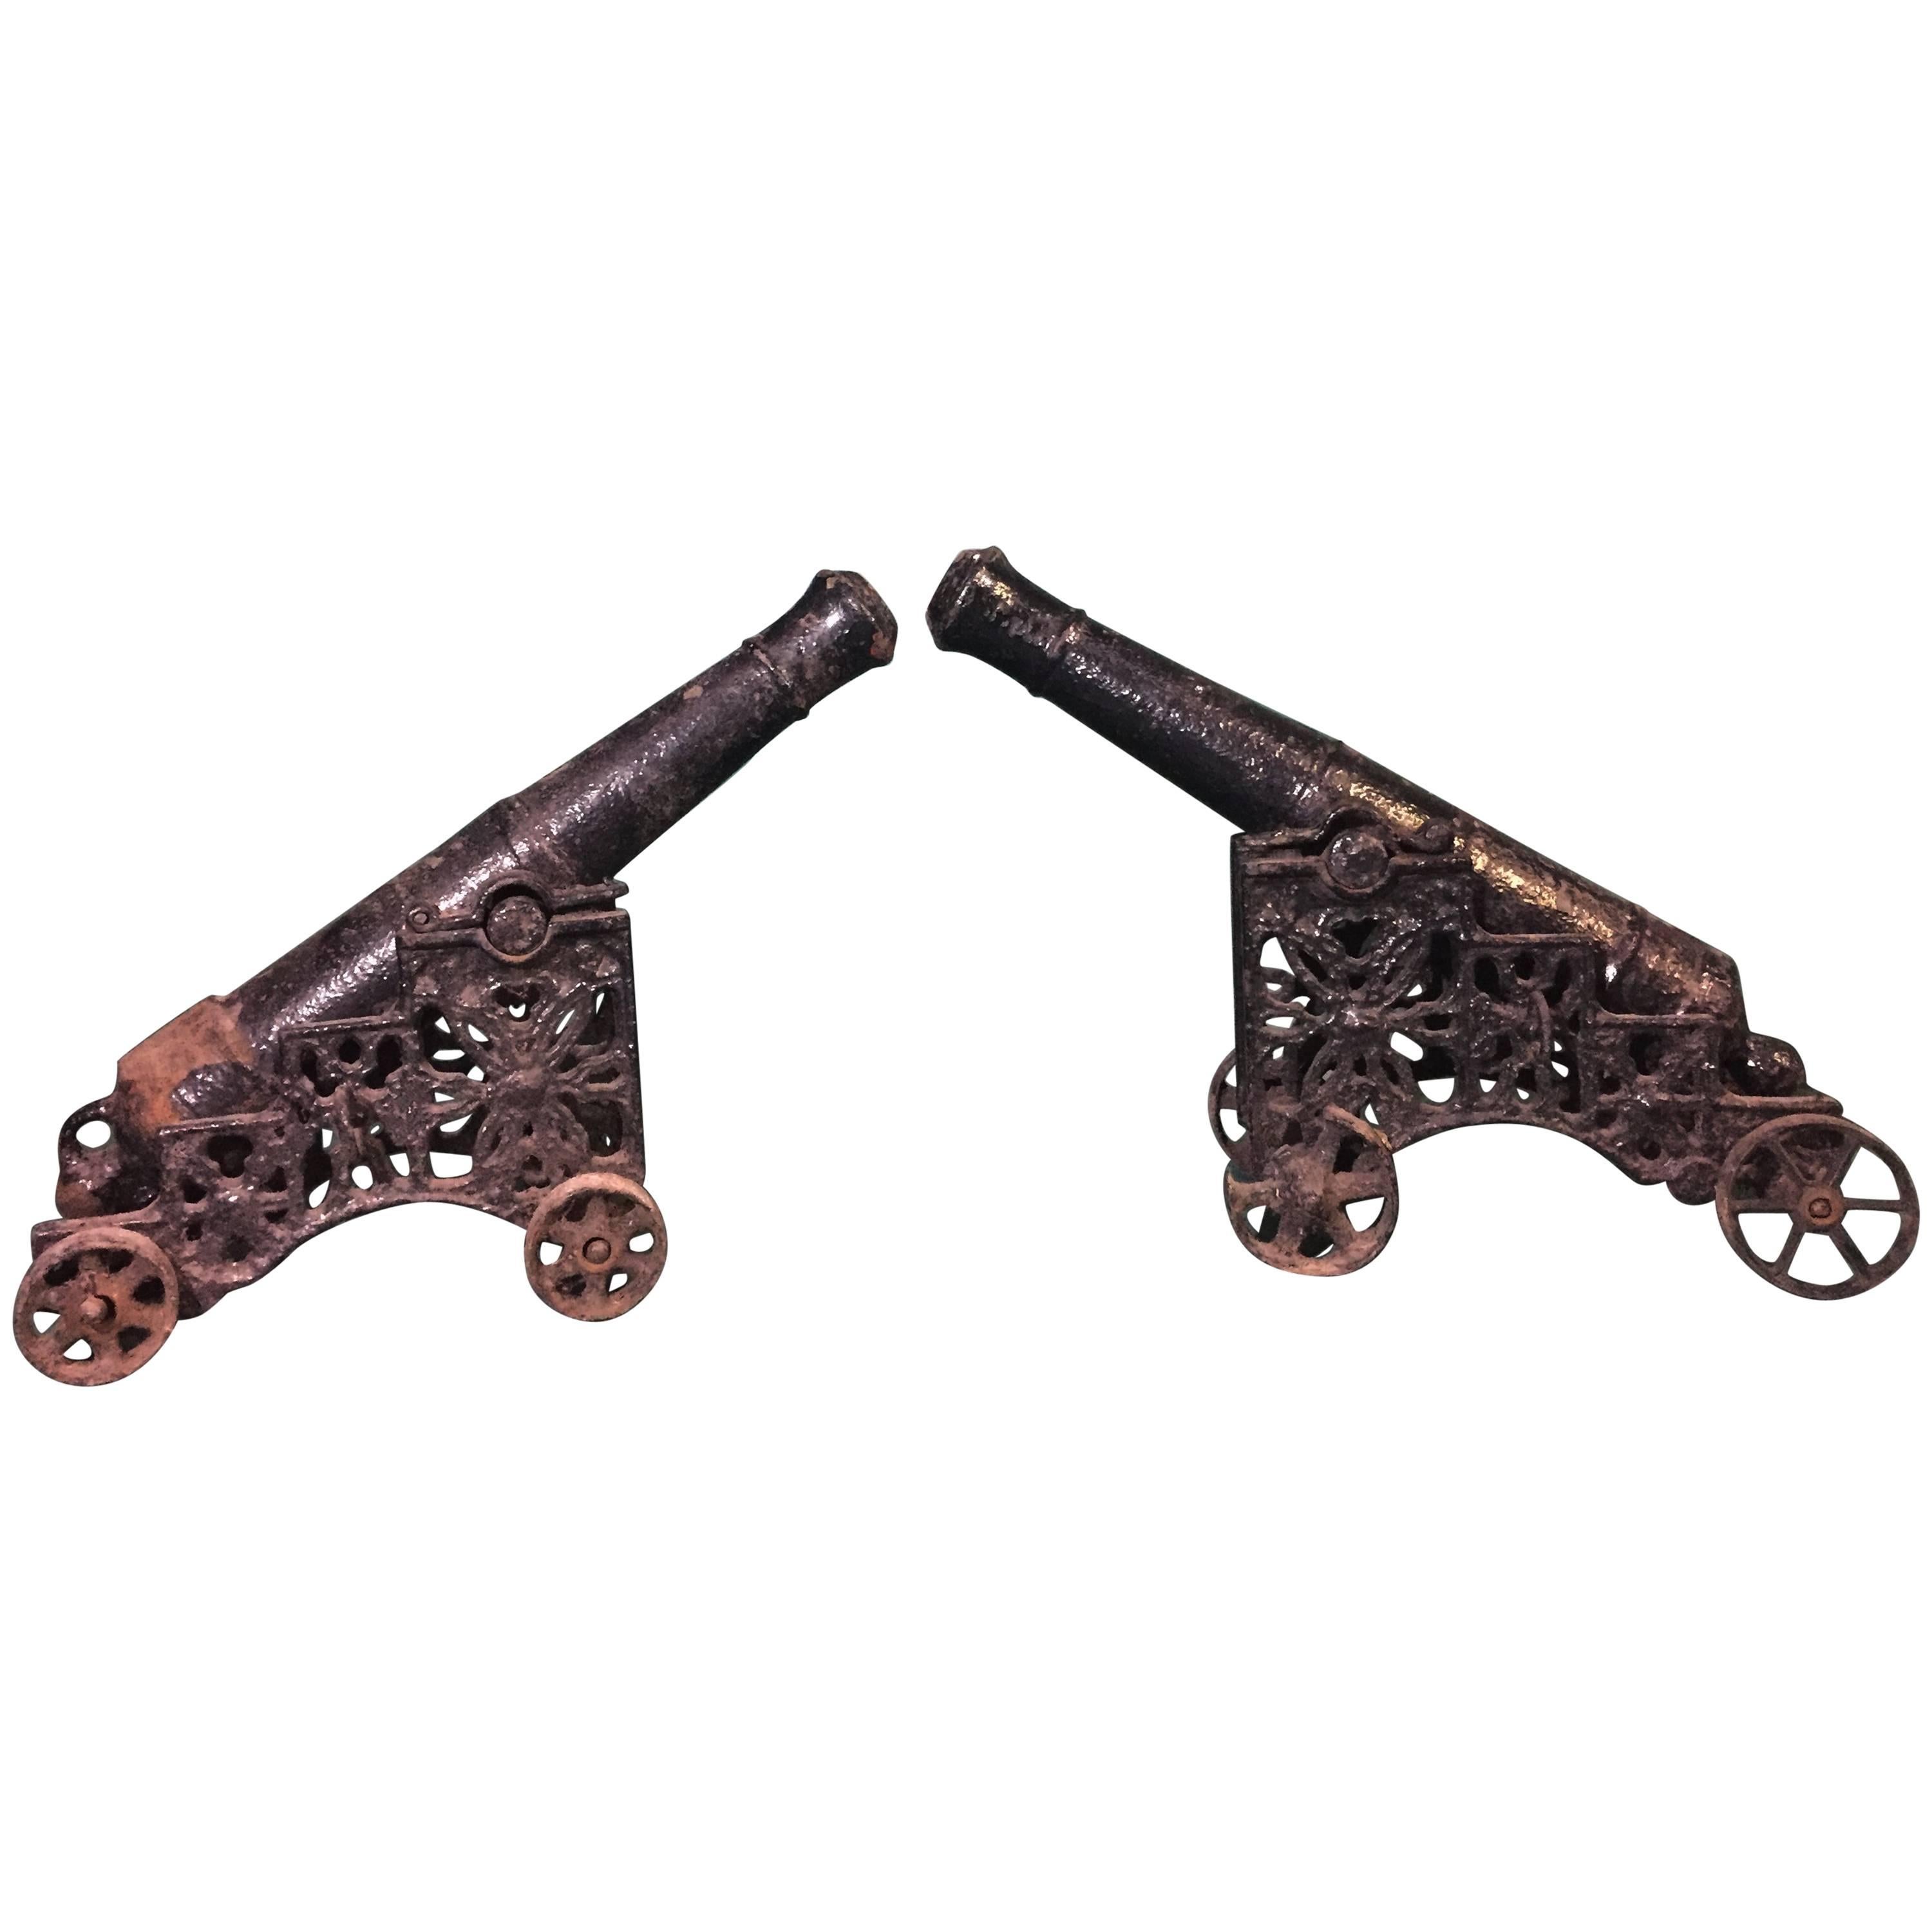 Two Antique 18th Century Original Iron Cannons of circa 1750 Period For Sale